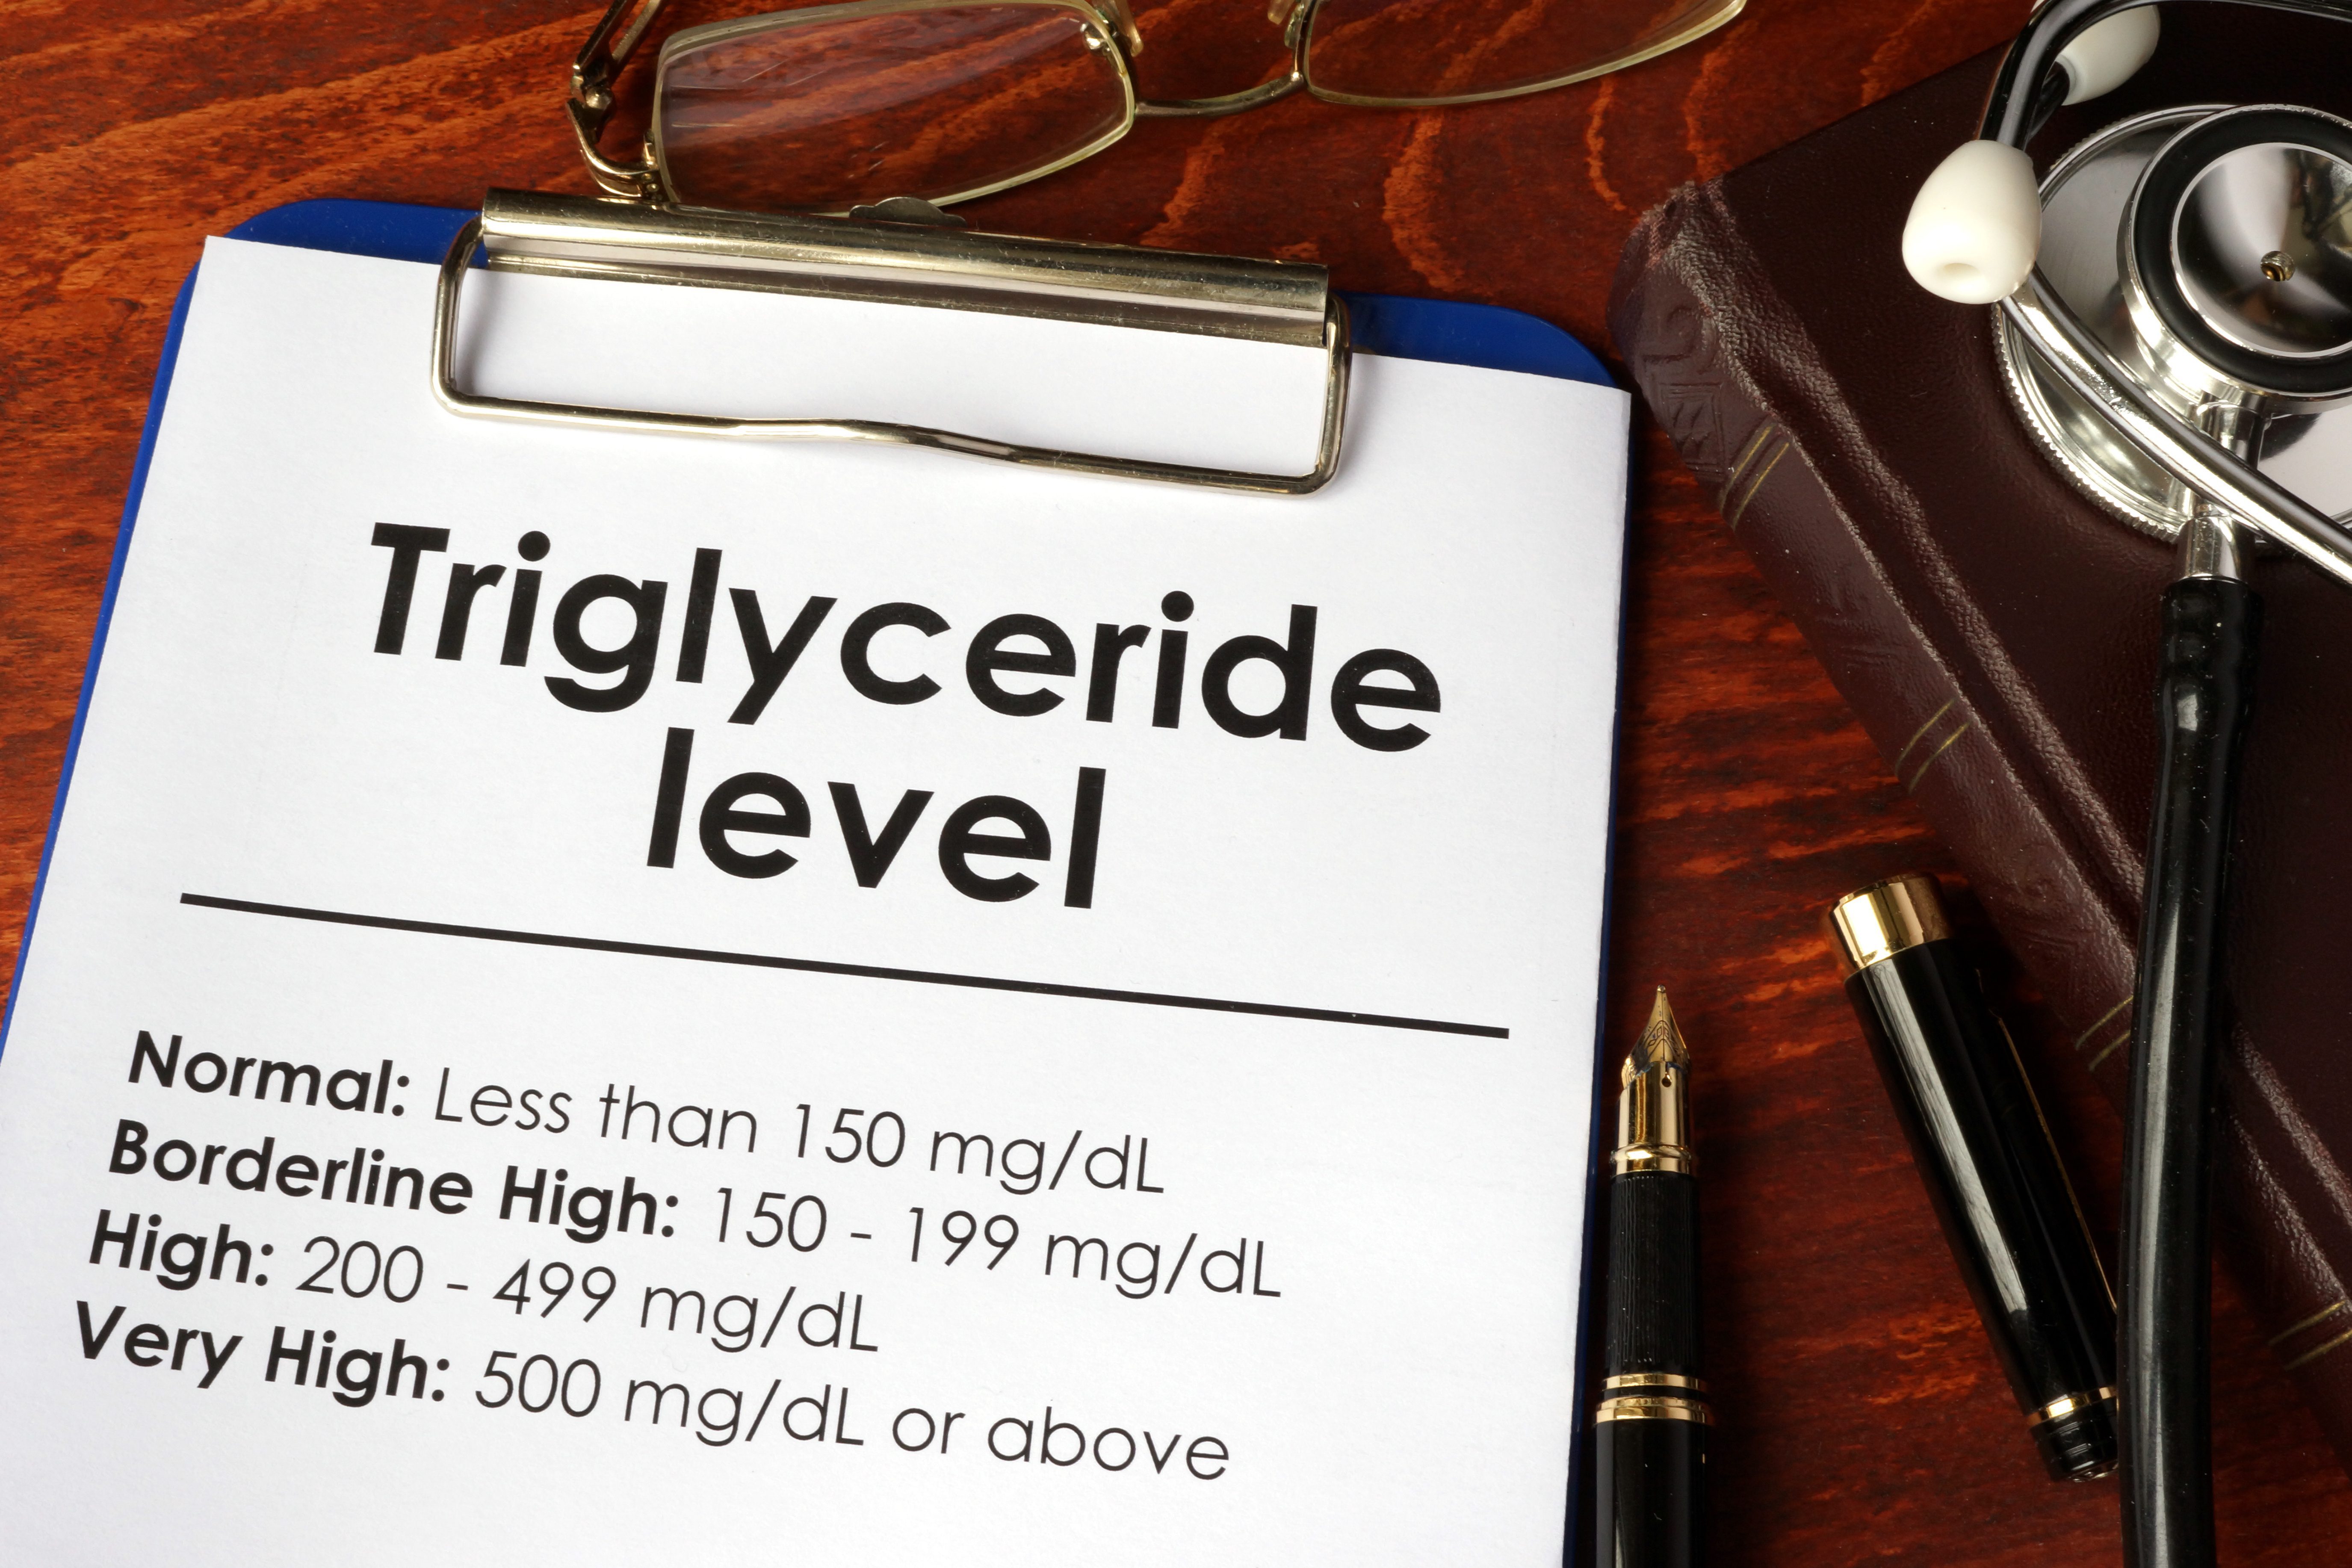 Triglyceride level chart on a table. Medical concept.